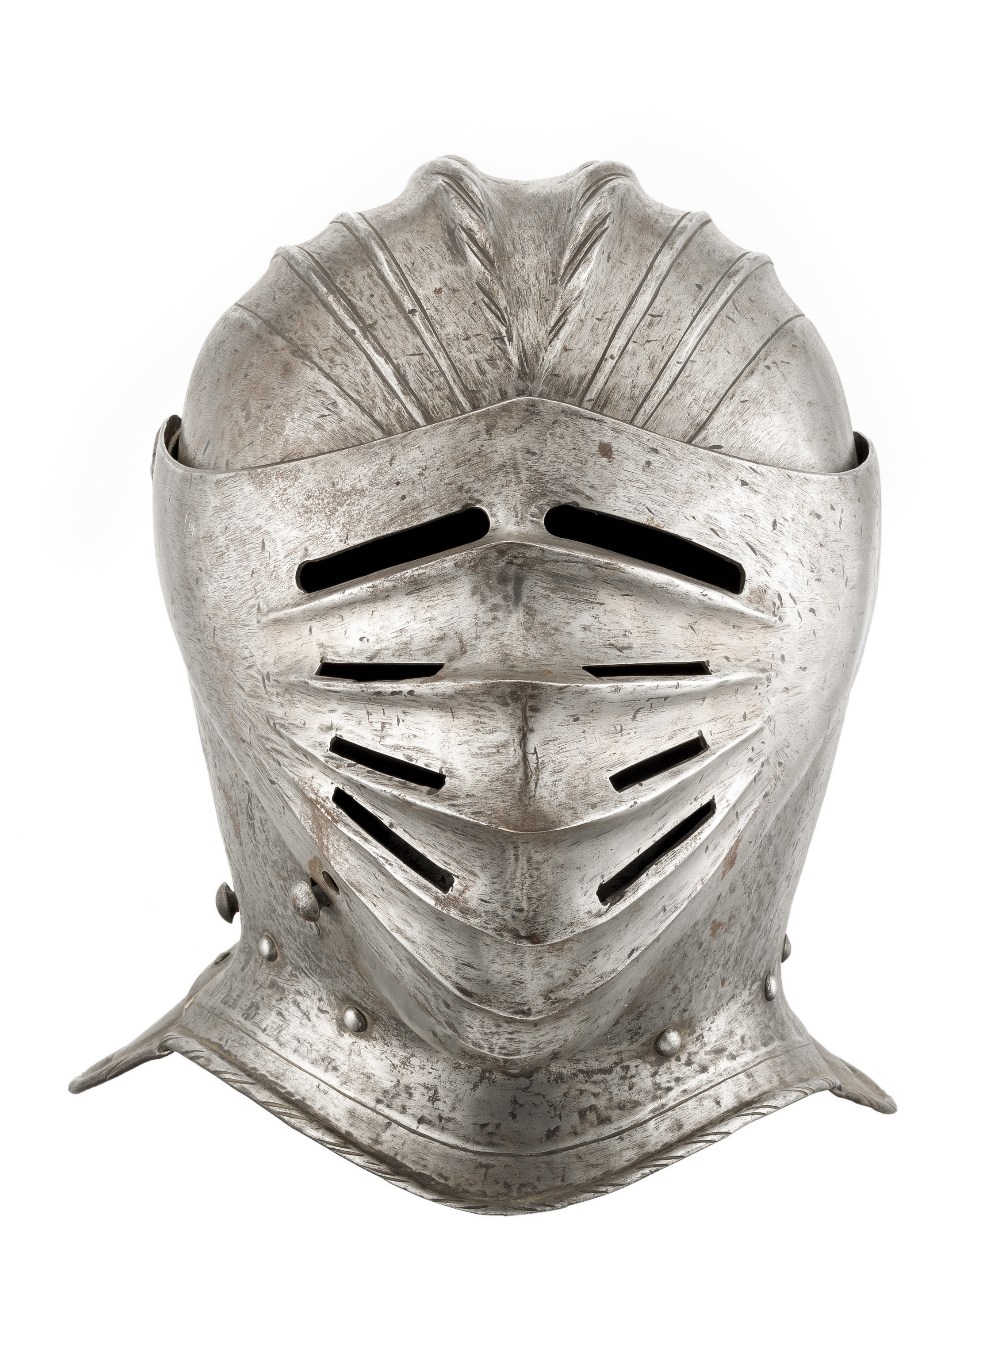 A FLUTED CLOSE HELMET IN THE SO-CALLED GERMAN 'MAXIMILIAN' FASHION OF CIRCA 1515-30, LATE 19TH/